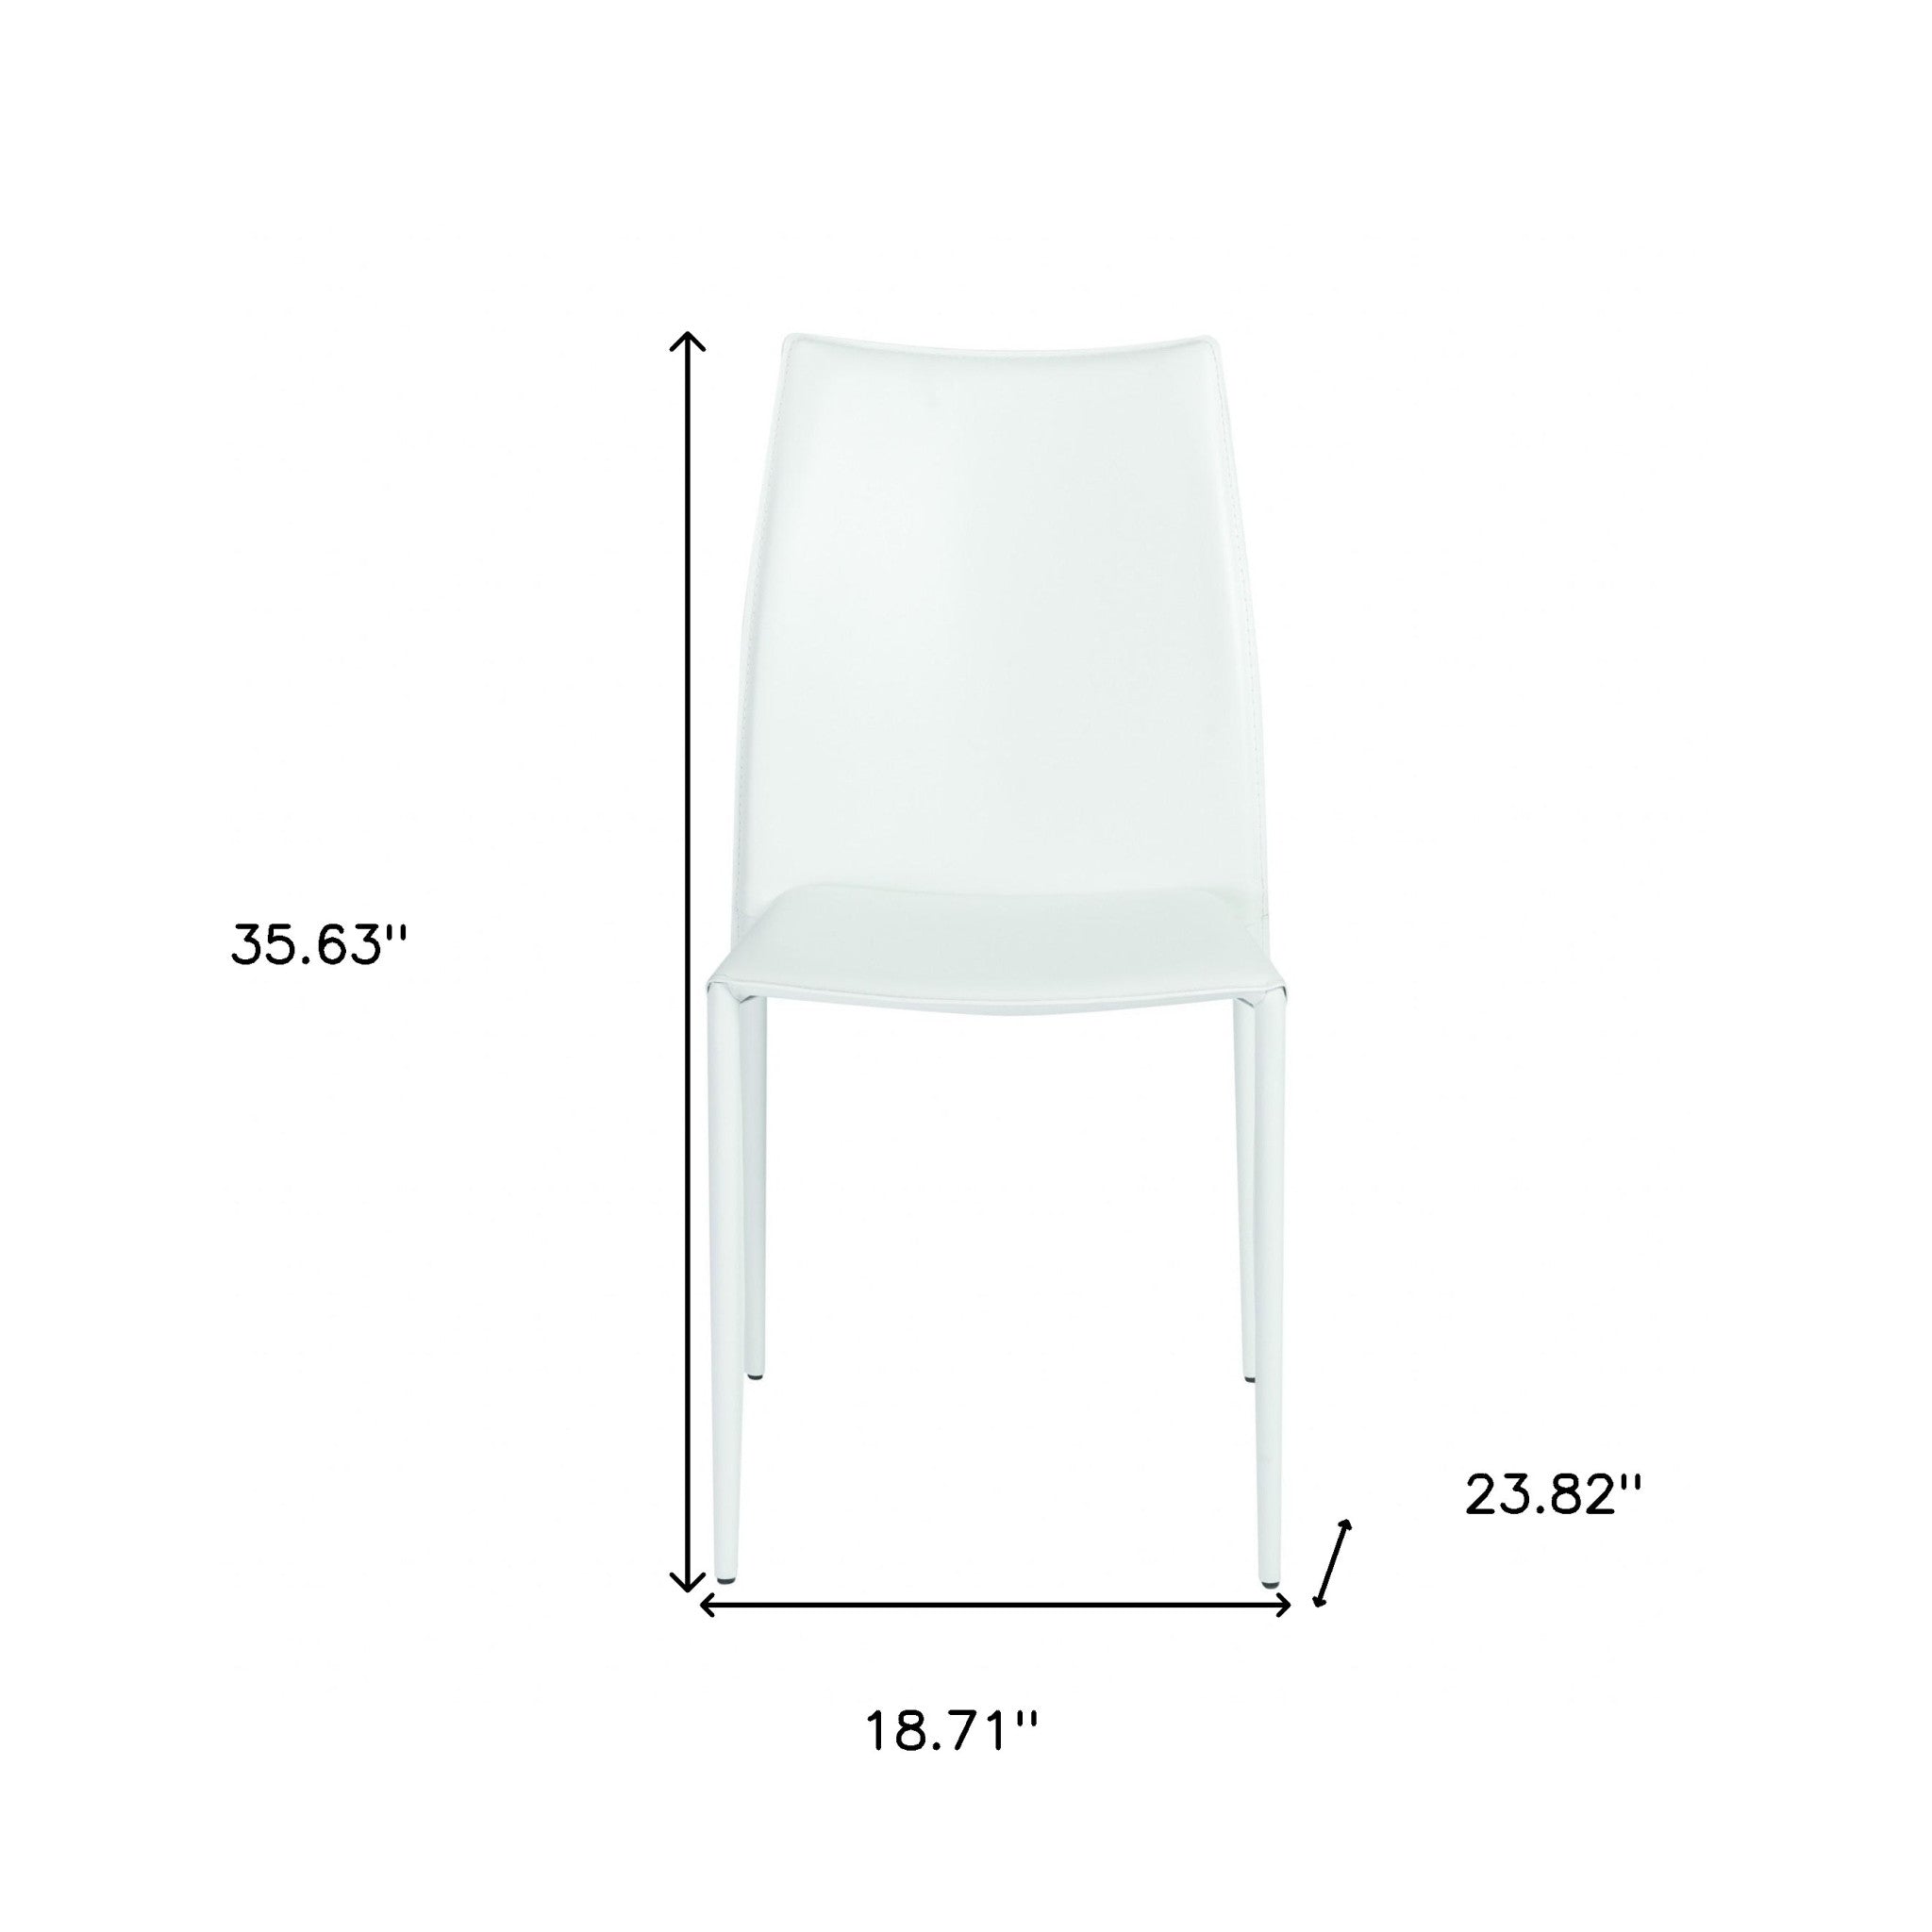 Set of Two Premium All White Stacking Dining Chairs